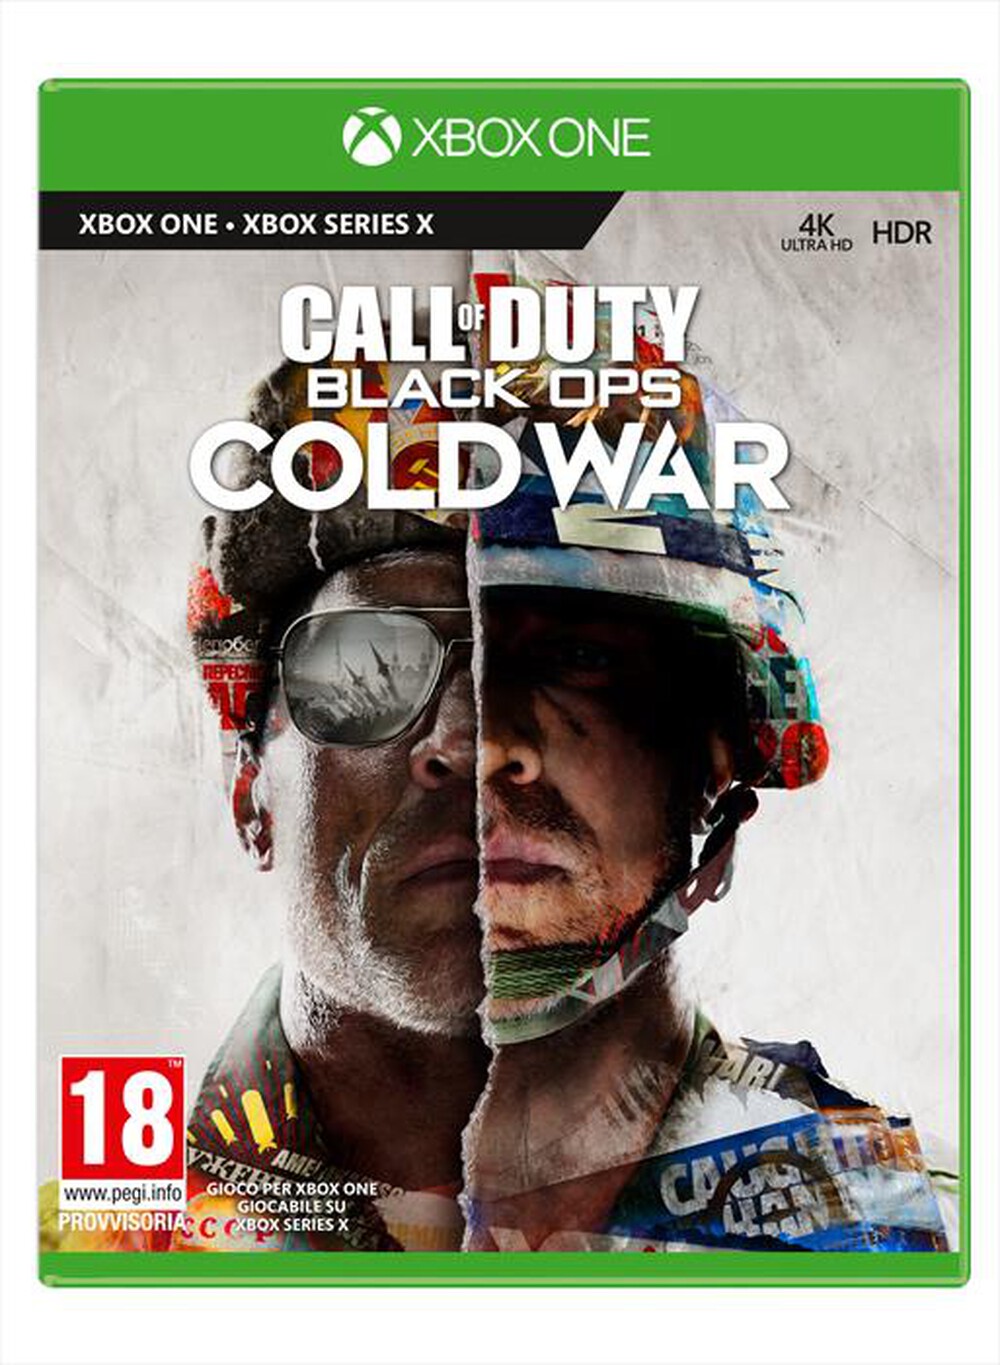 "ACTIVISION-BLIZZARD - CALL OF DUTY: BLACK OPS COLD WAR (XBONE)"